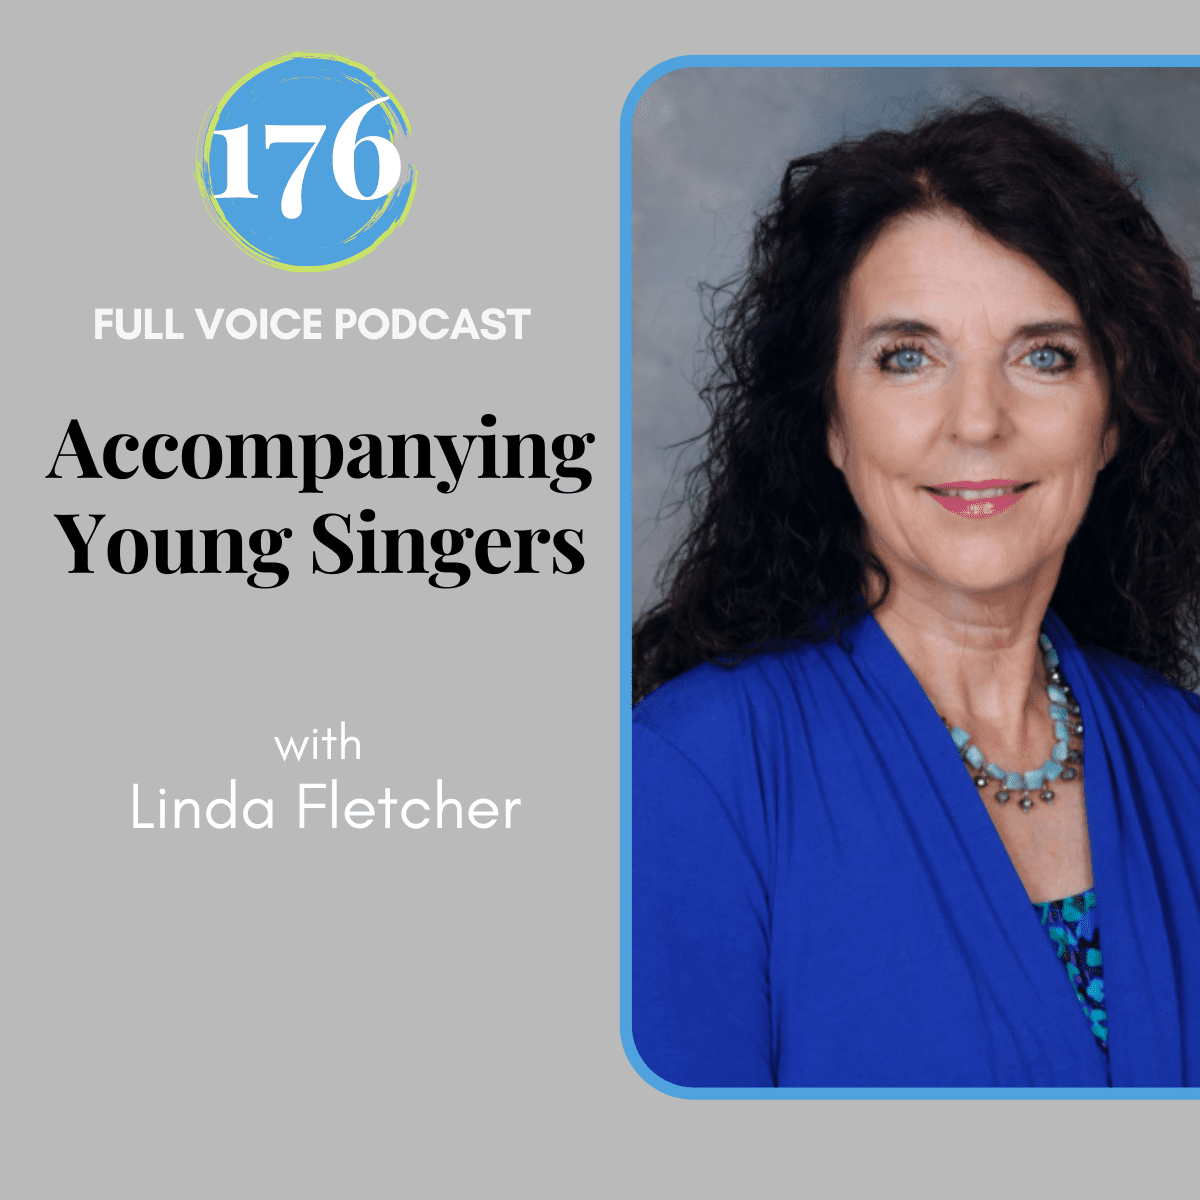 FULL VOICE Podcast 176 Accompanying Young Singers with Linda Fletcher